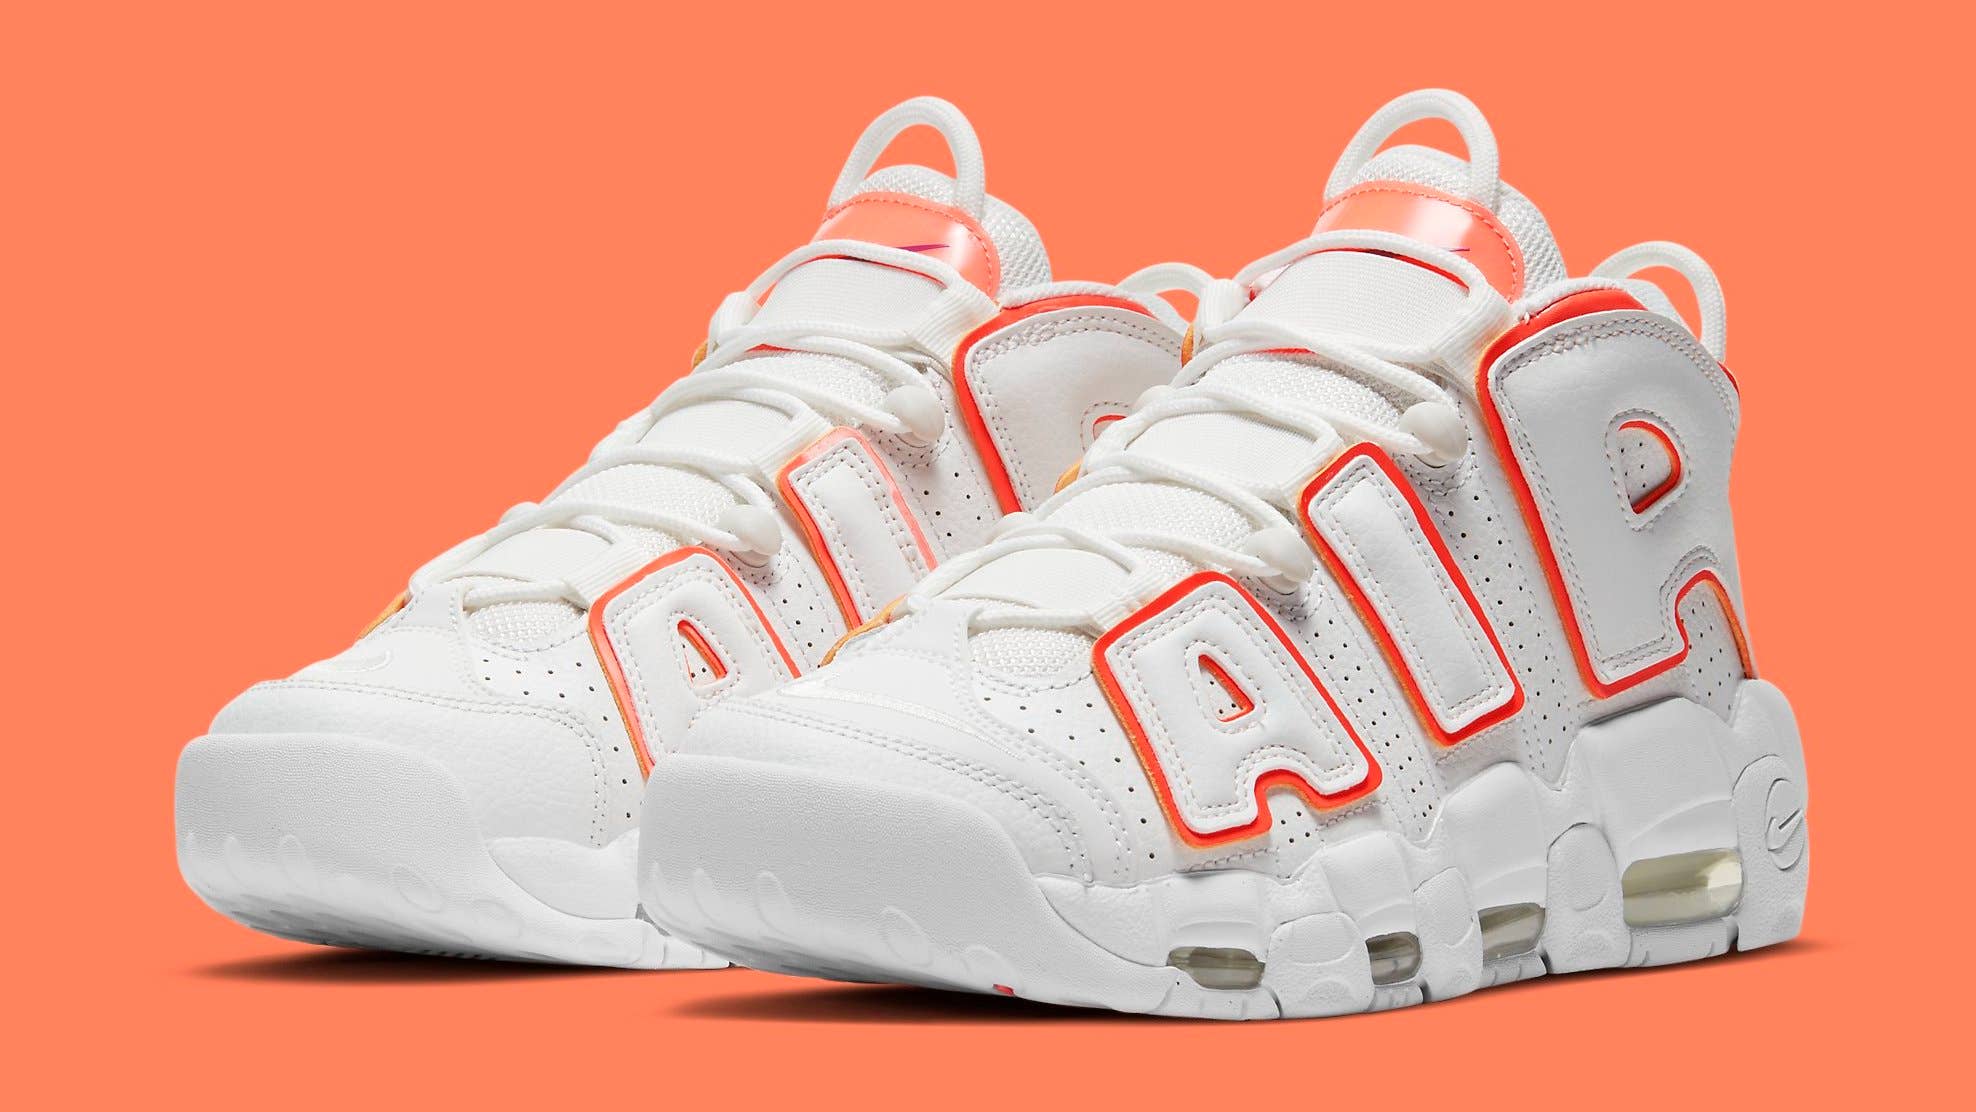 Nike Air More Uptempo 'Sunset' DH4968 100 Pair